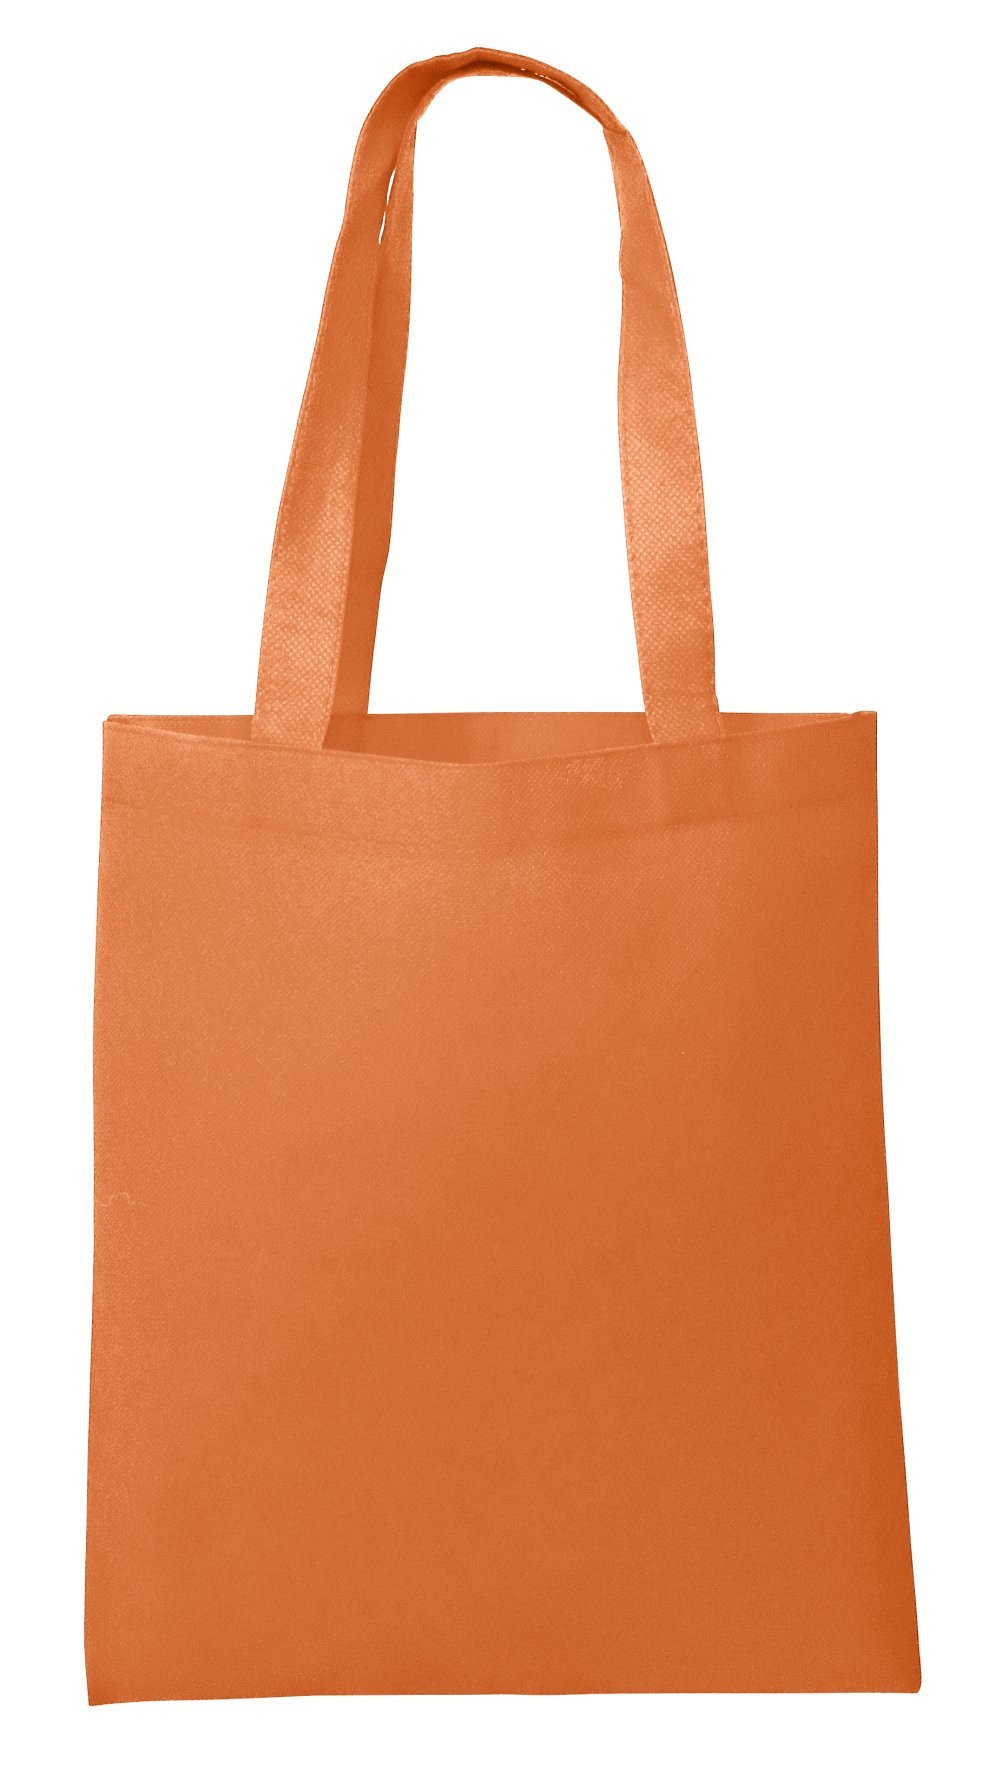 Cheap Promotional Tote Bags orange